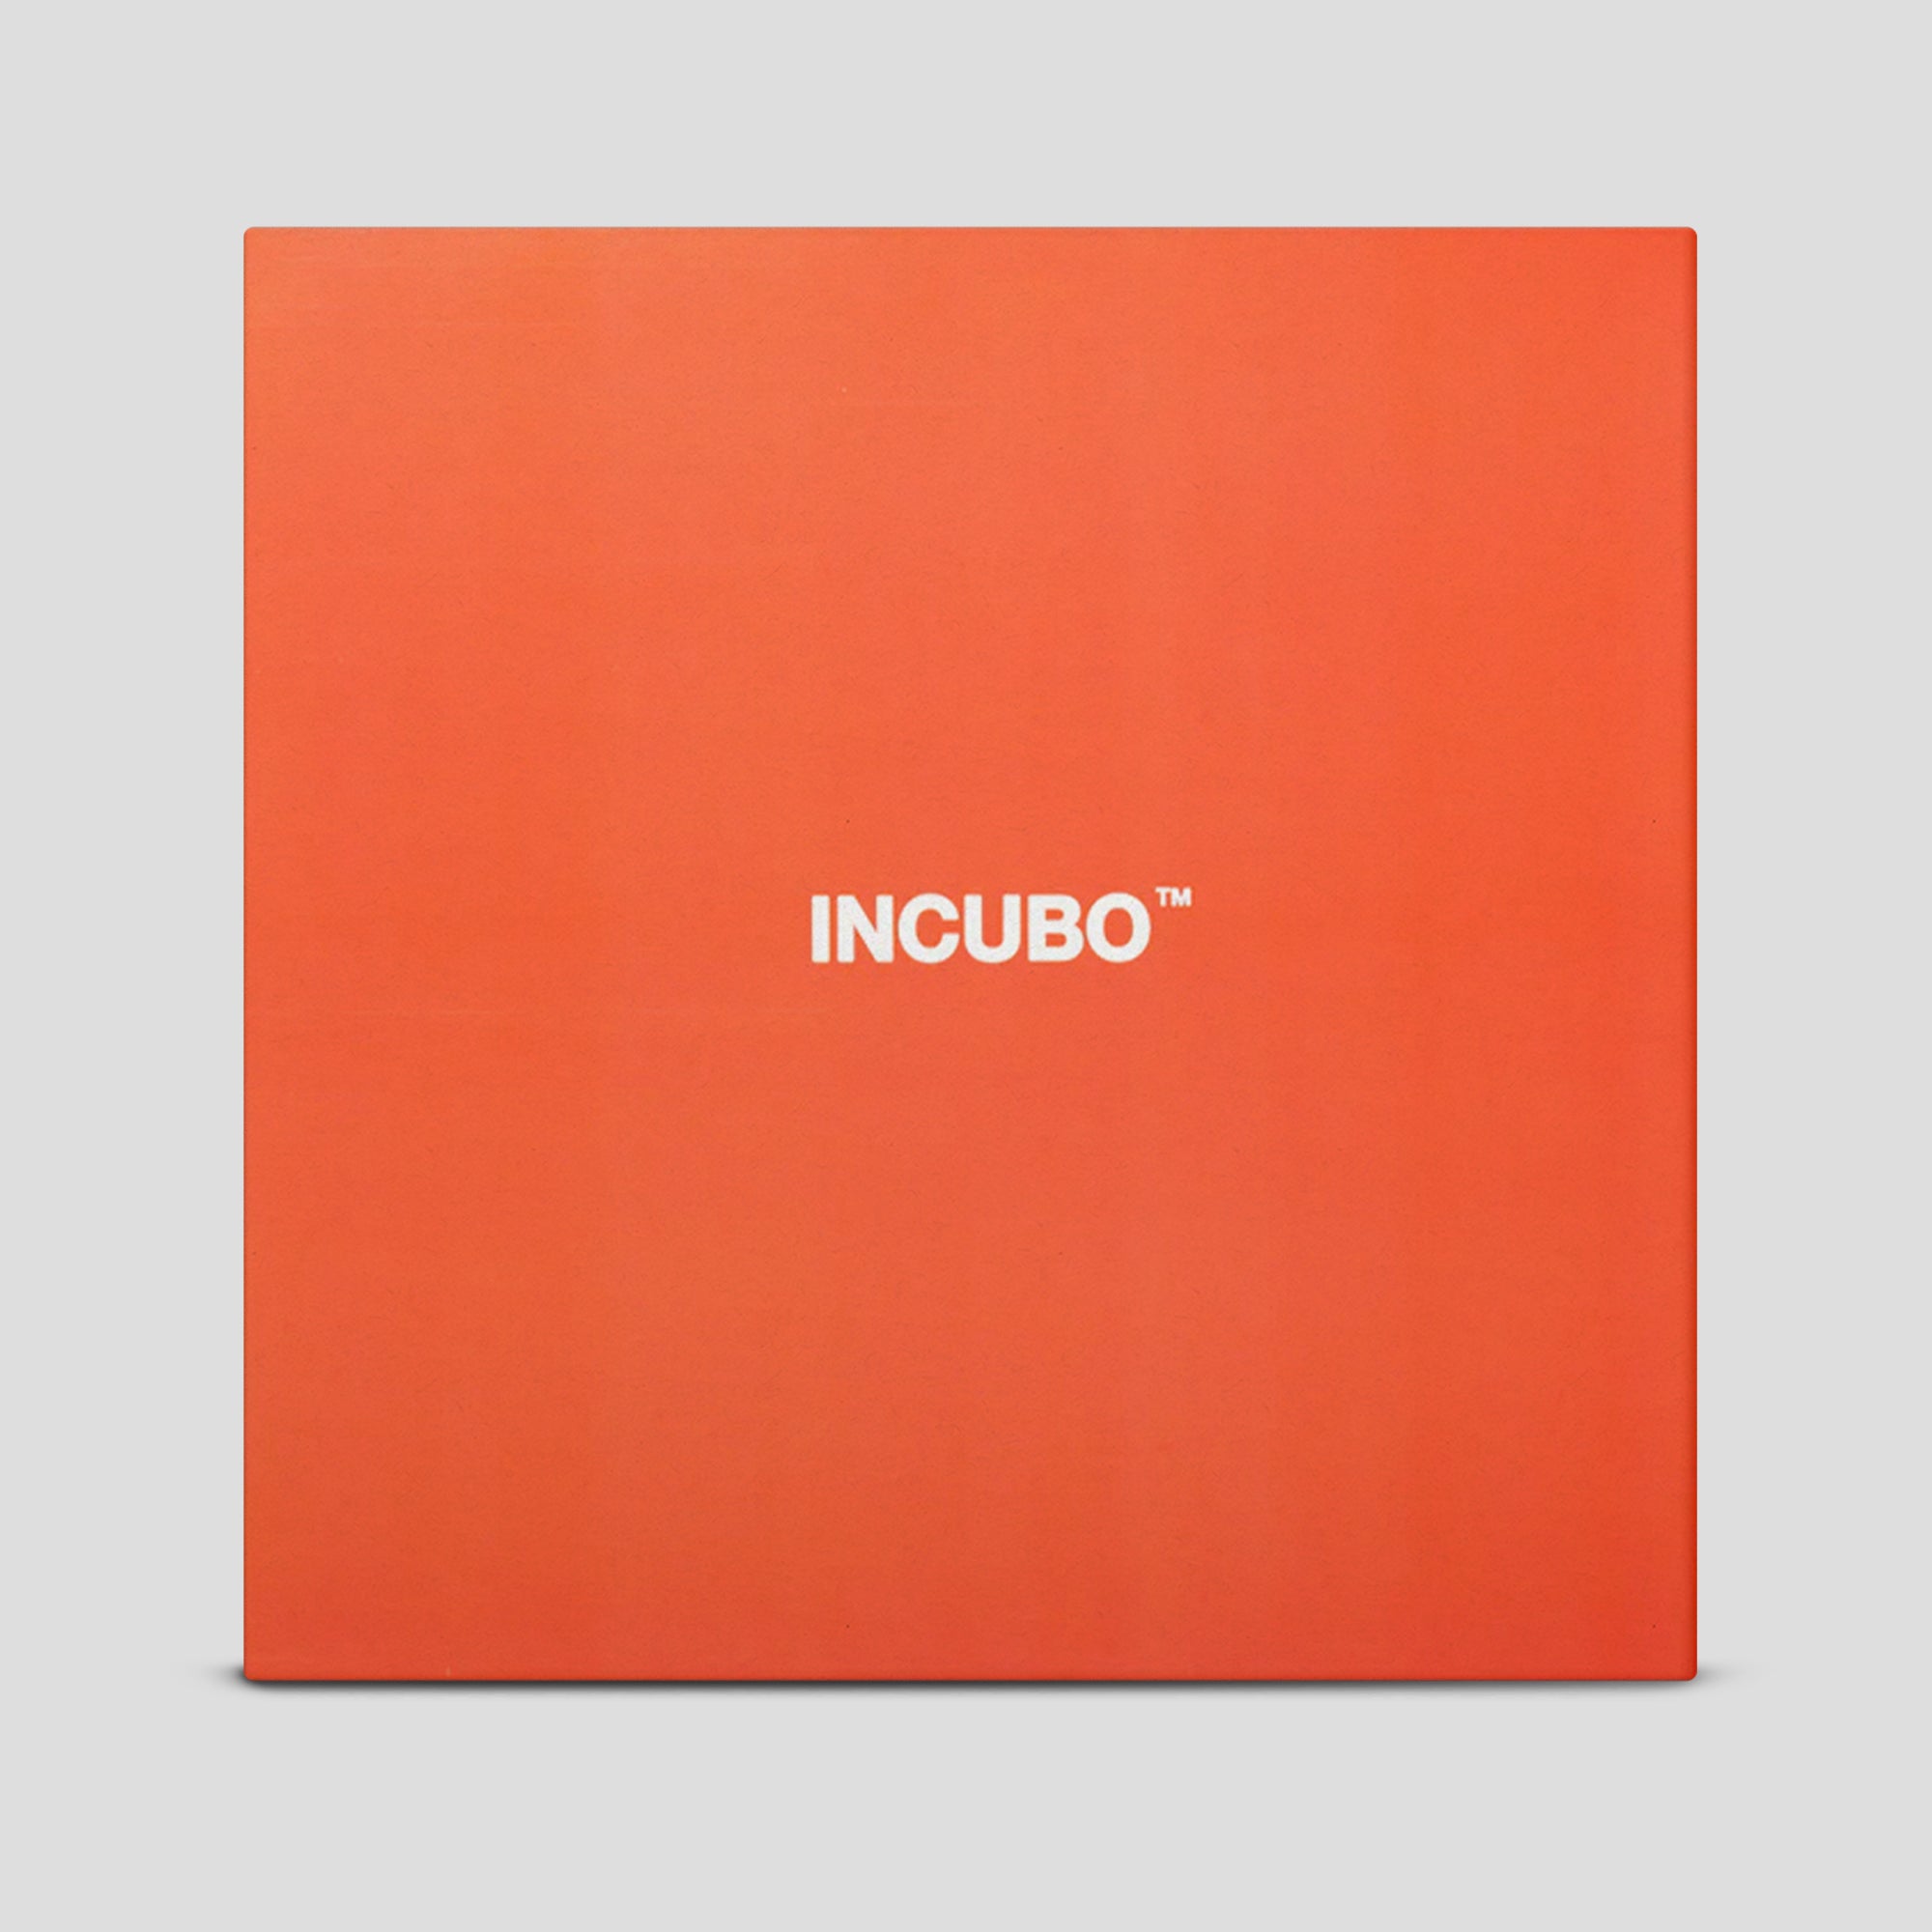 SURFING "INCUBO" LP